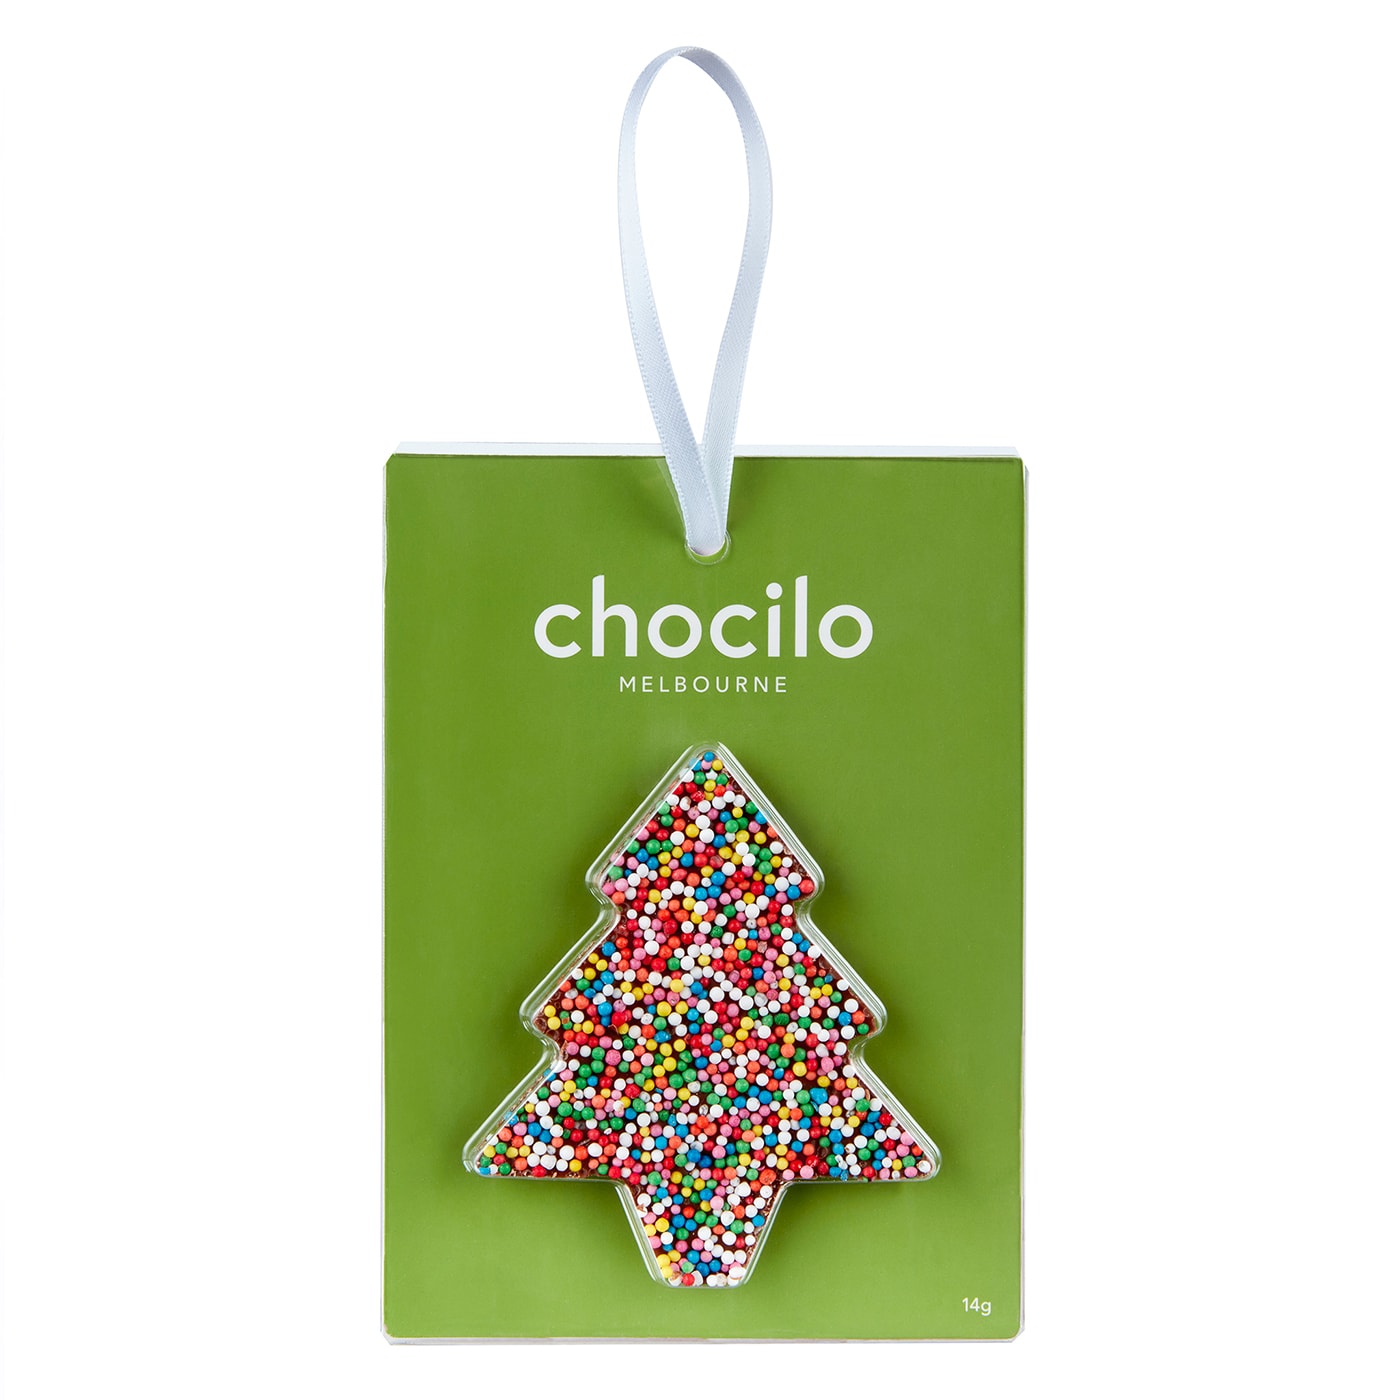 Chocilo Melbourne Milk Chocolate Christmas Tree packaged in a clear plastic case with a green backing card, hanging with a white satin ribbon.